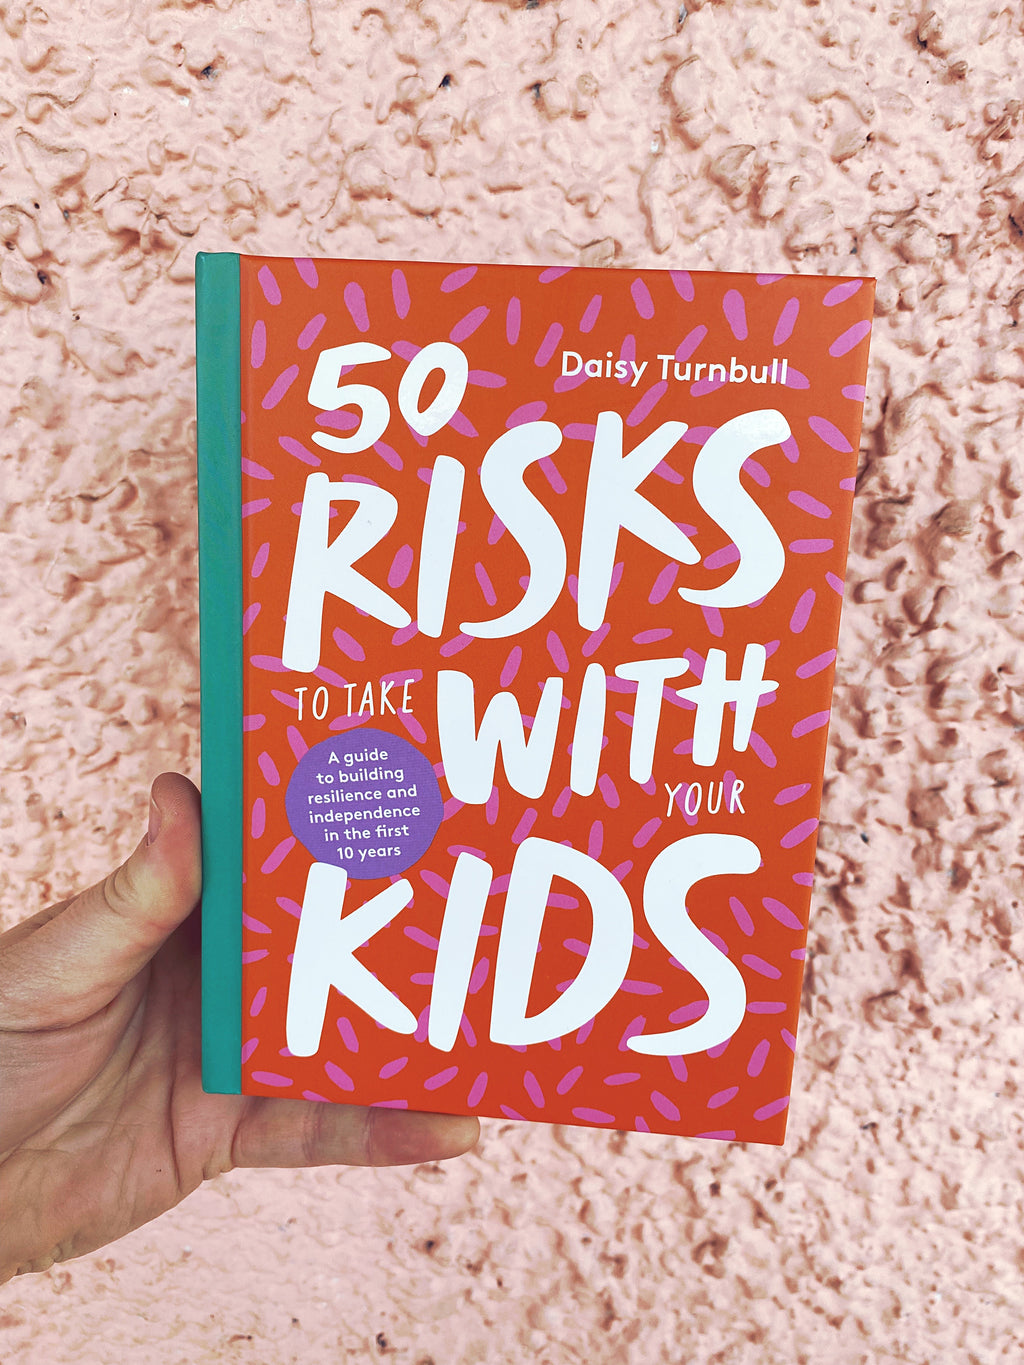 50 Risks to Take With Your Kids